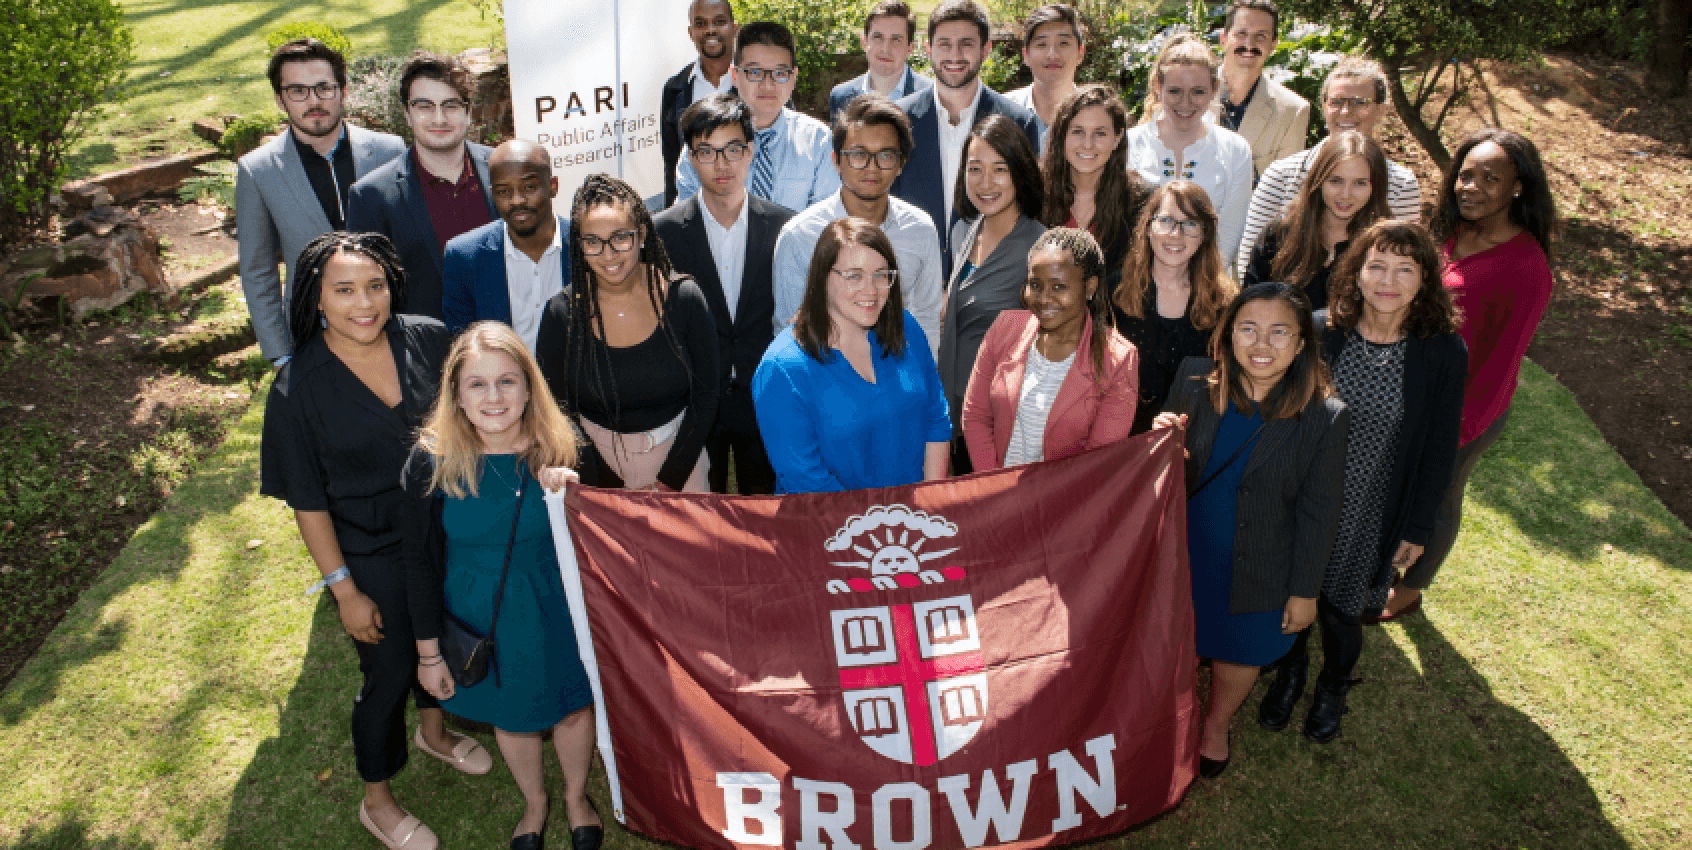 PARI hosts Master’s students from Brown University